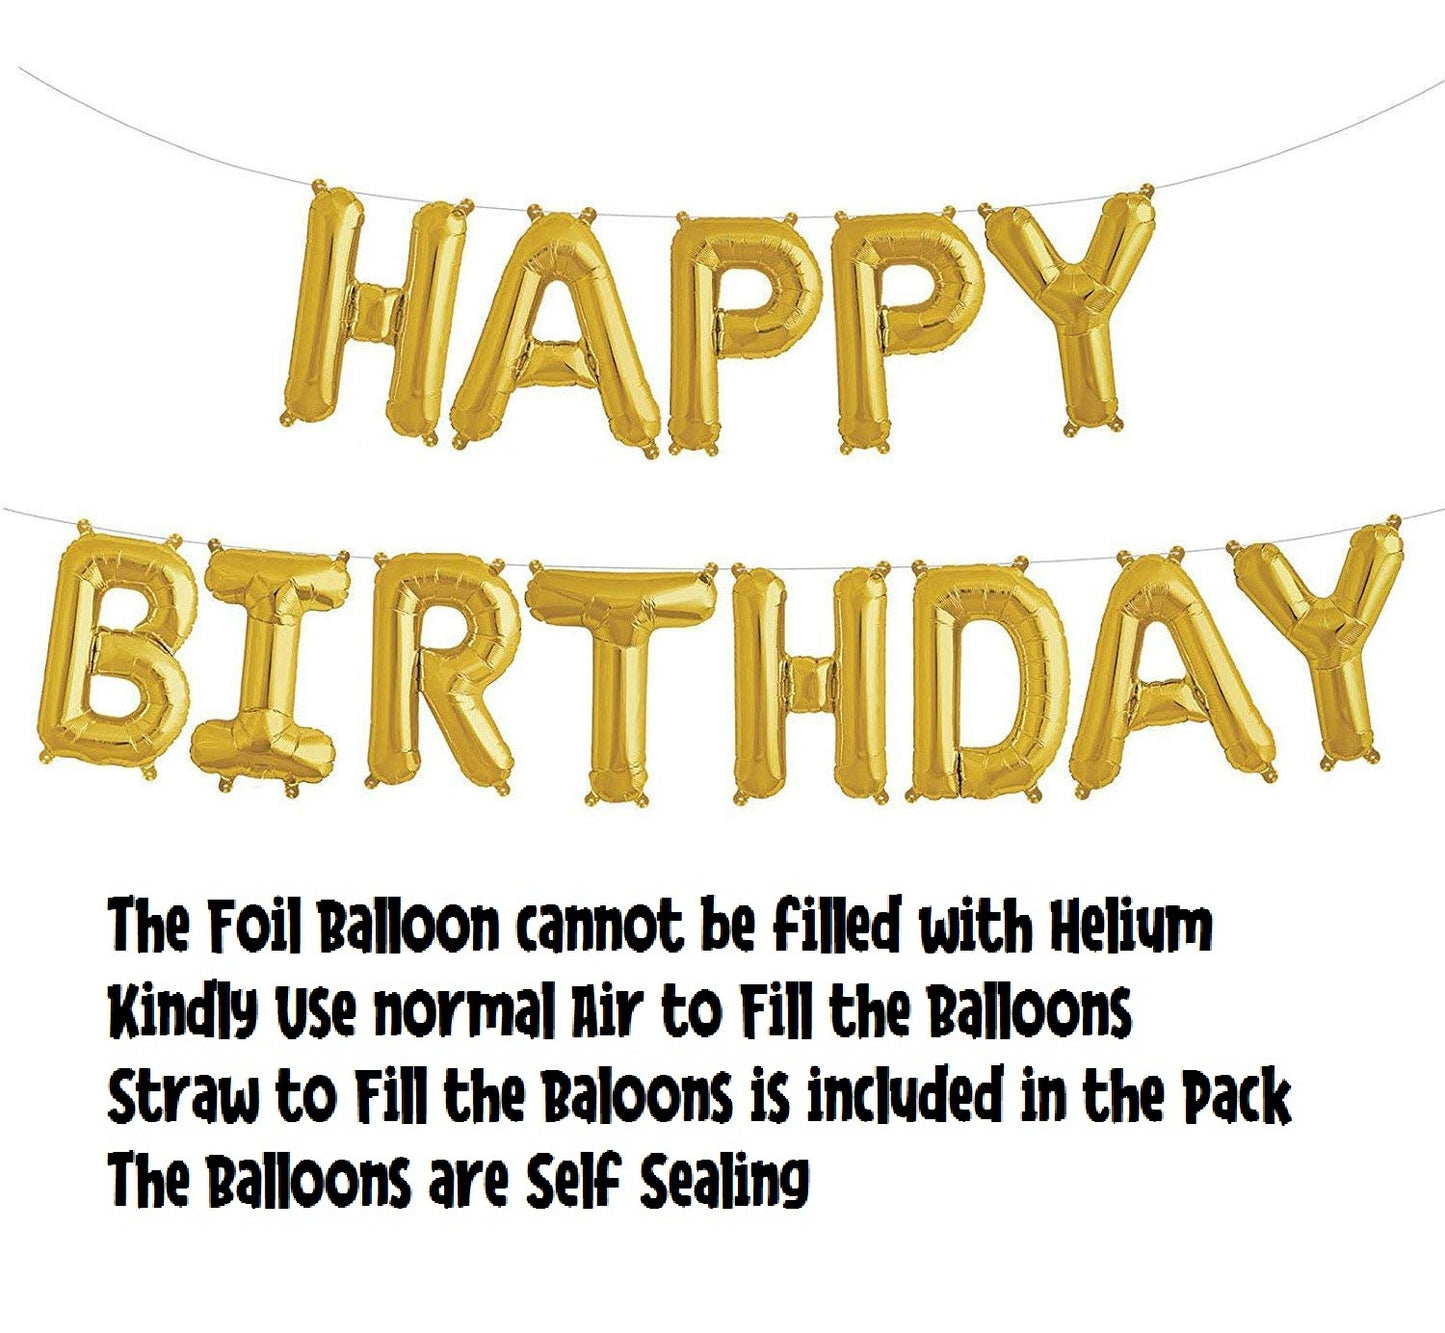 Happy 24th Birthday Foil Balloon Combo Party Decoration for Anniversary Celebration 16 Inches